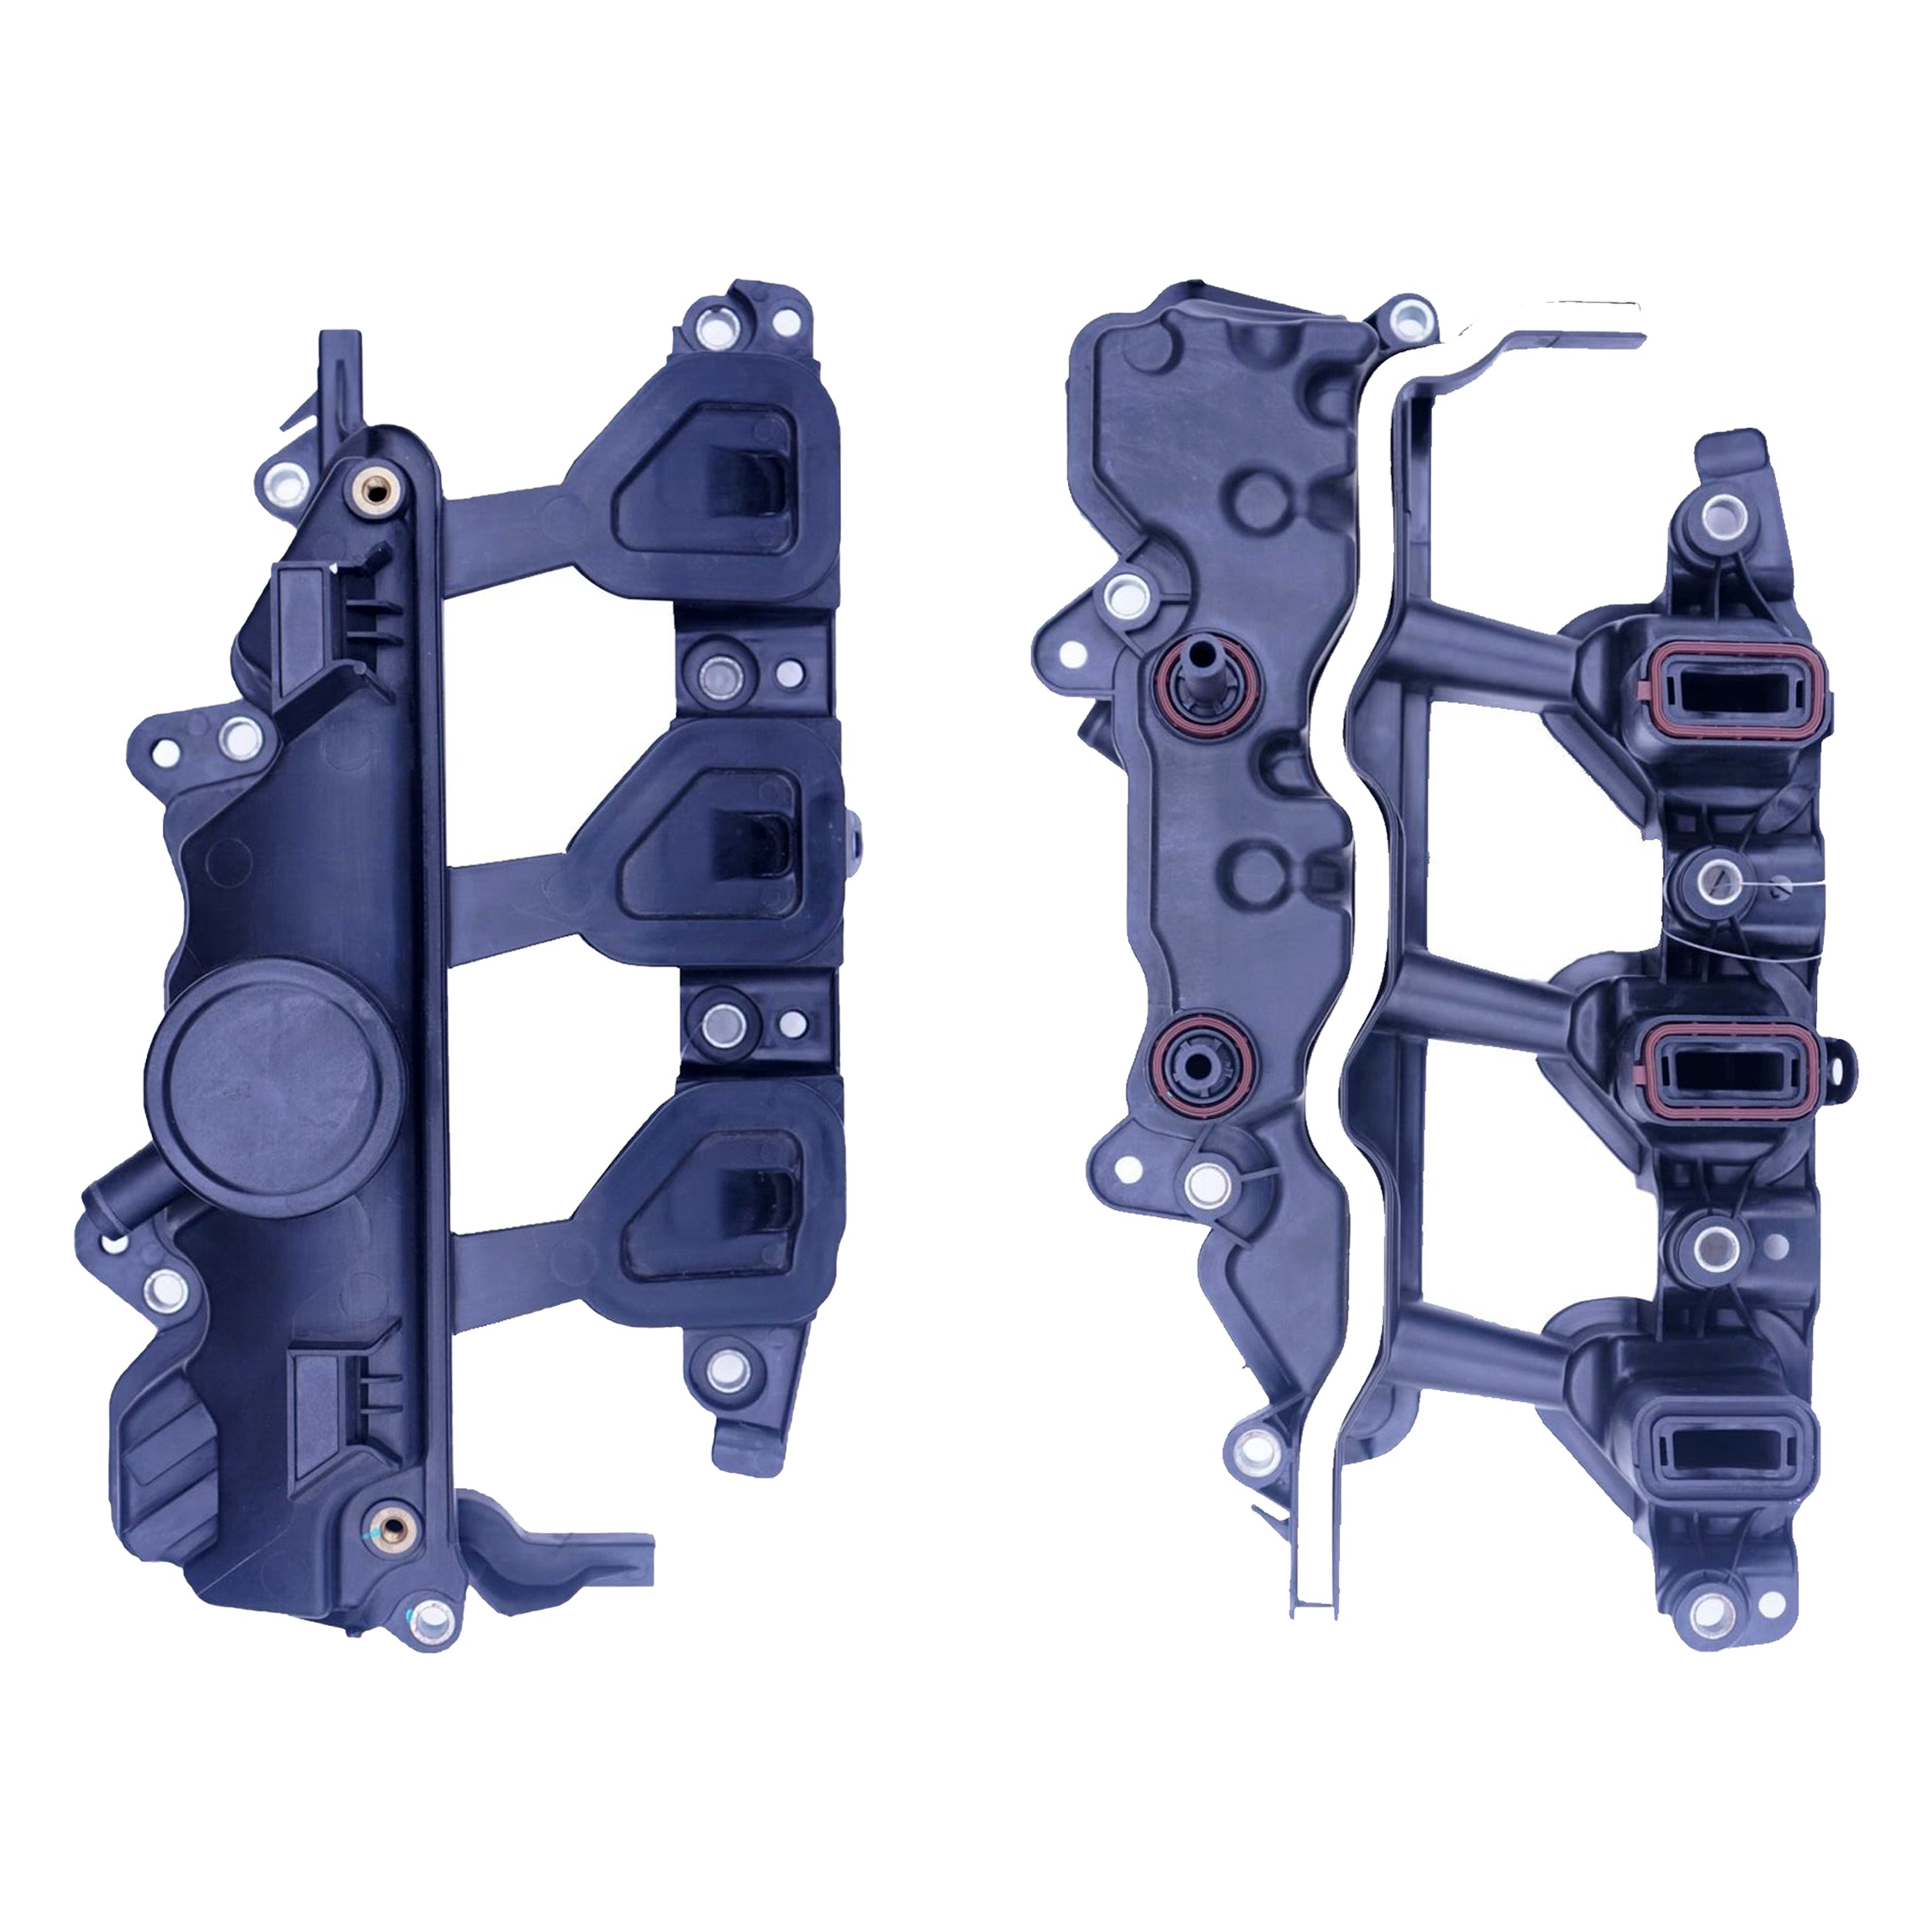 Intake Manifold for Mercedes-Benz, Nissan, Opel, Vauxhall, Renault